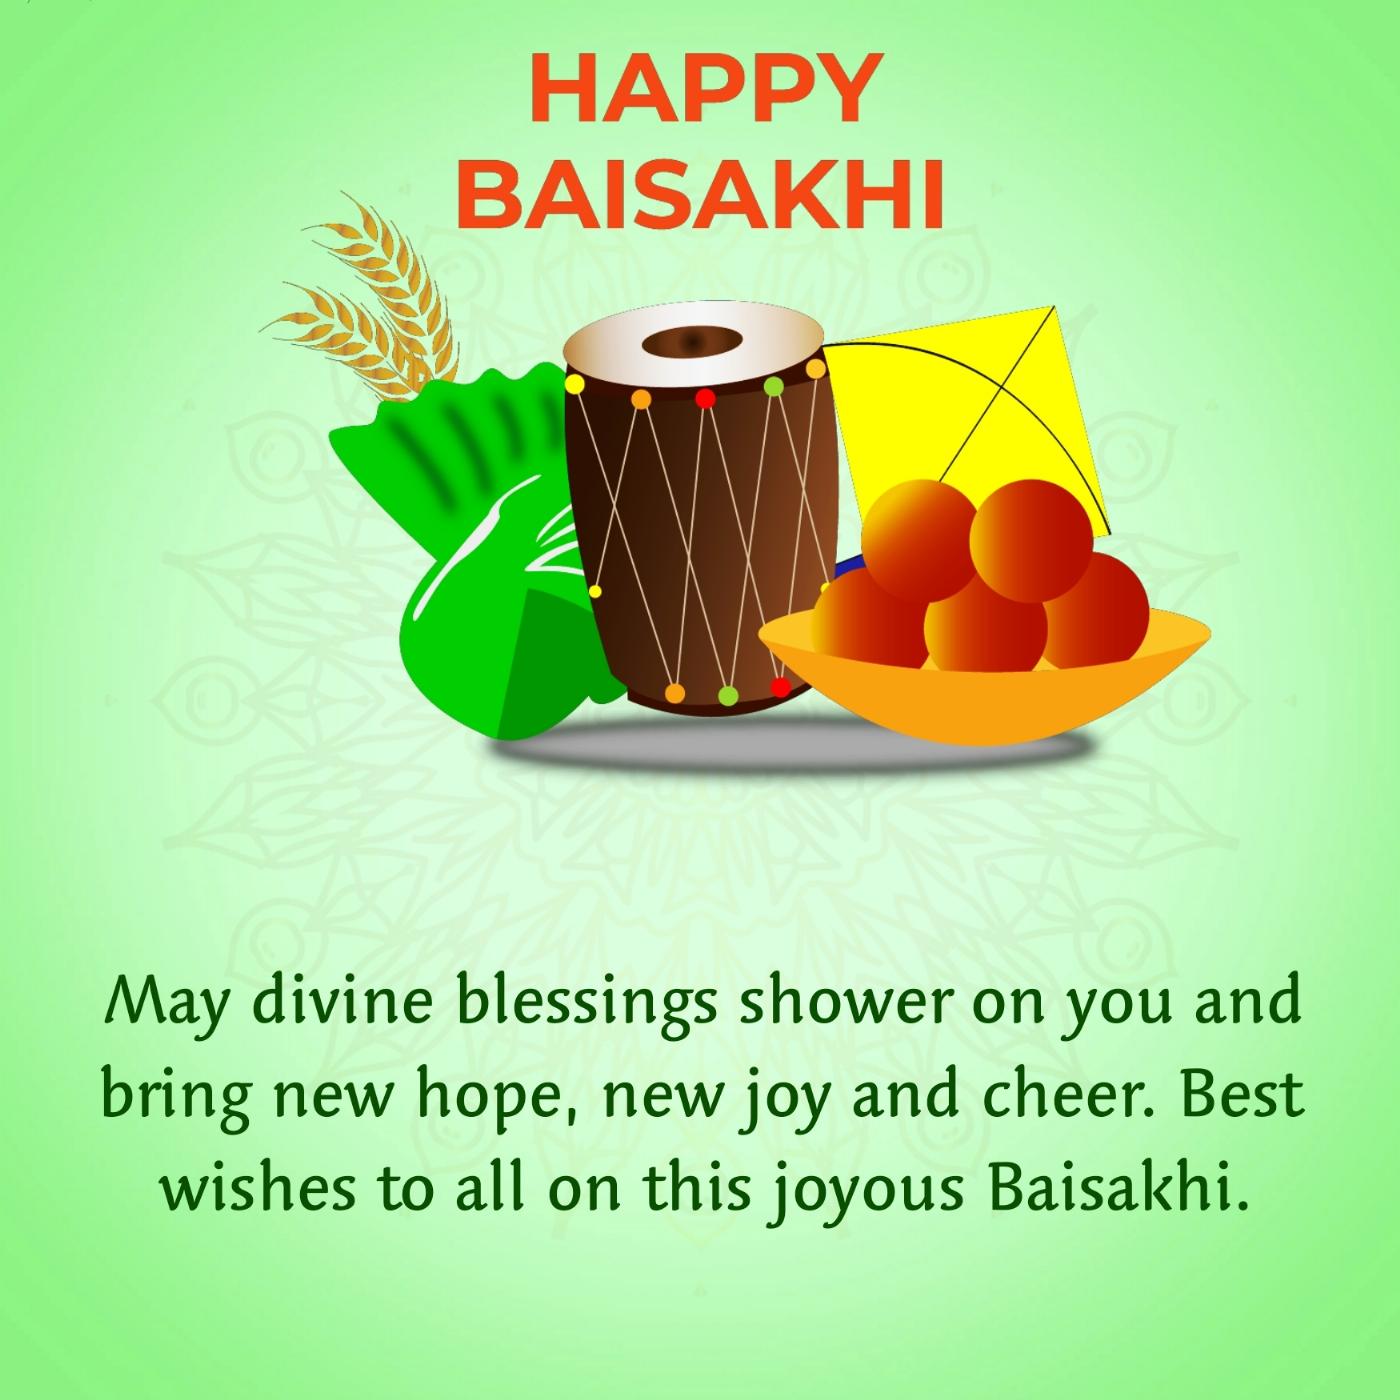 May divine blessings shower on you and bring new hope